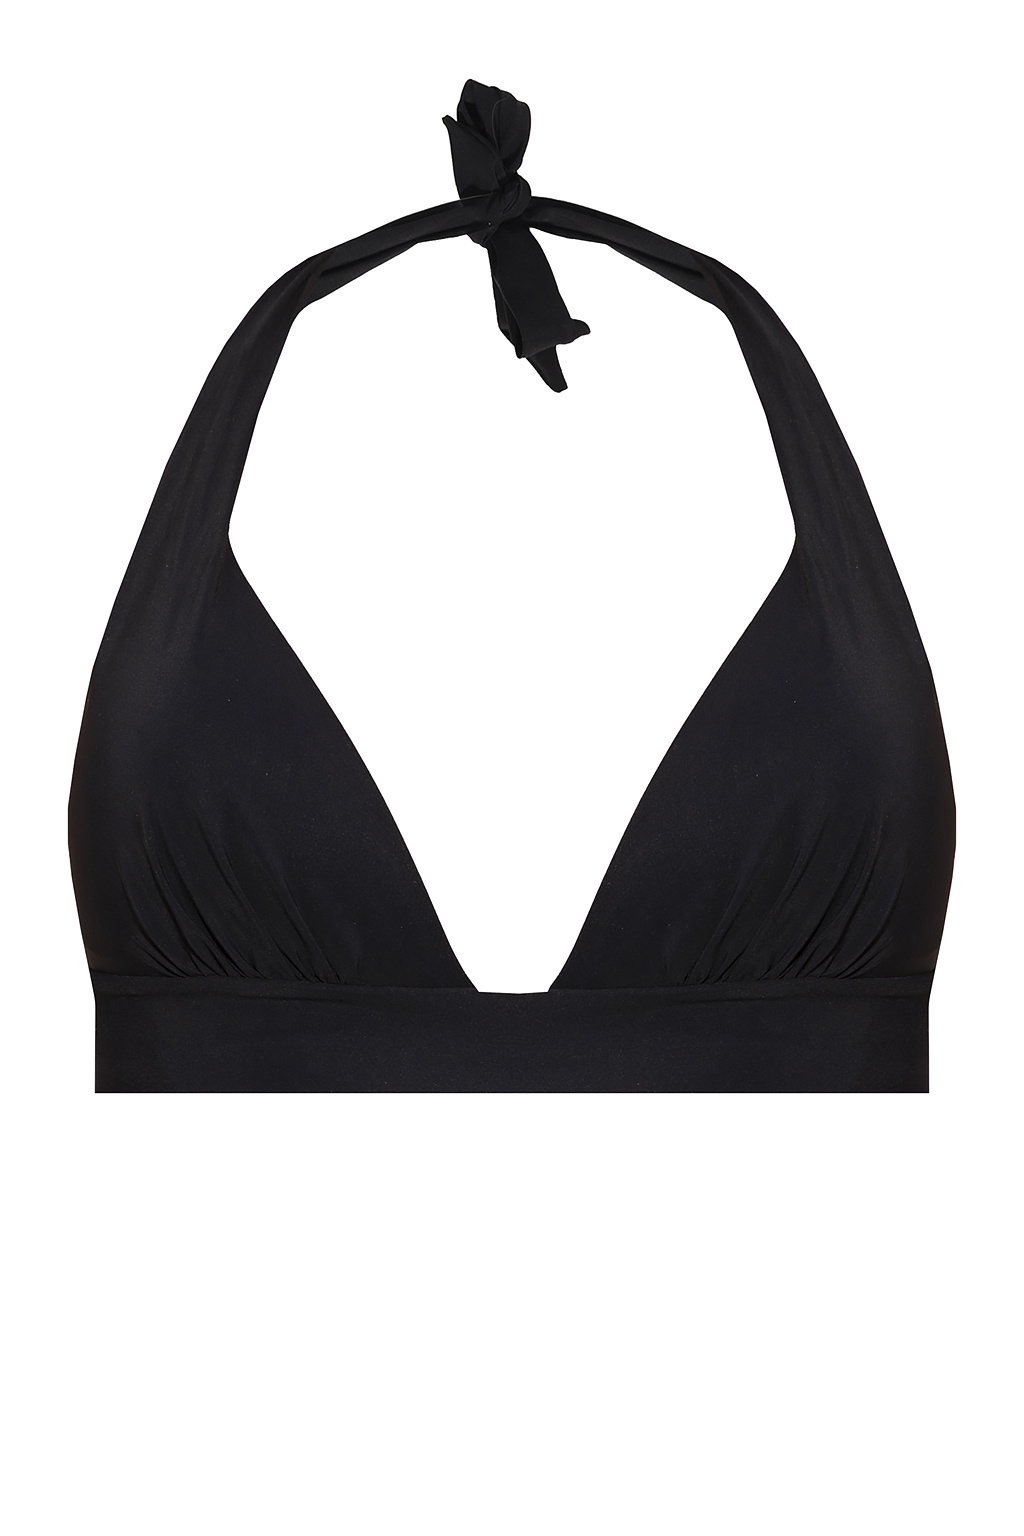 Donia swimsuit top ‘Donia’ swimsuit top